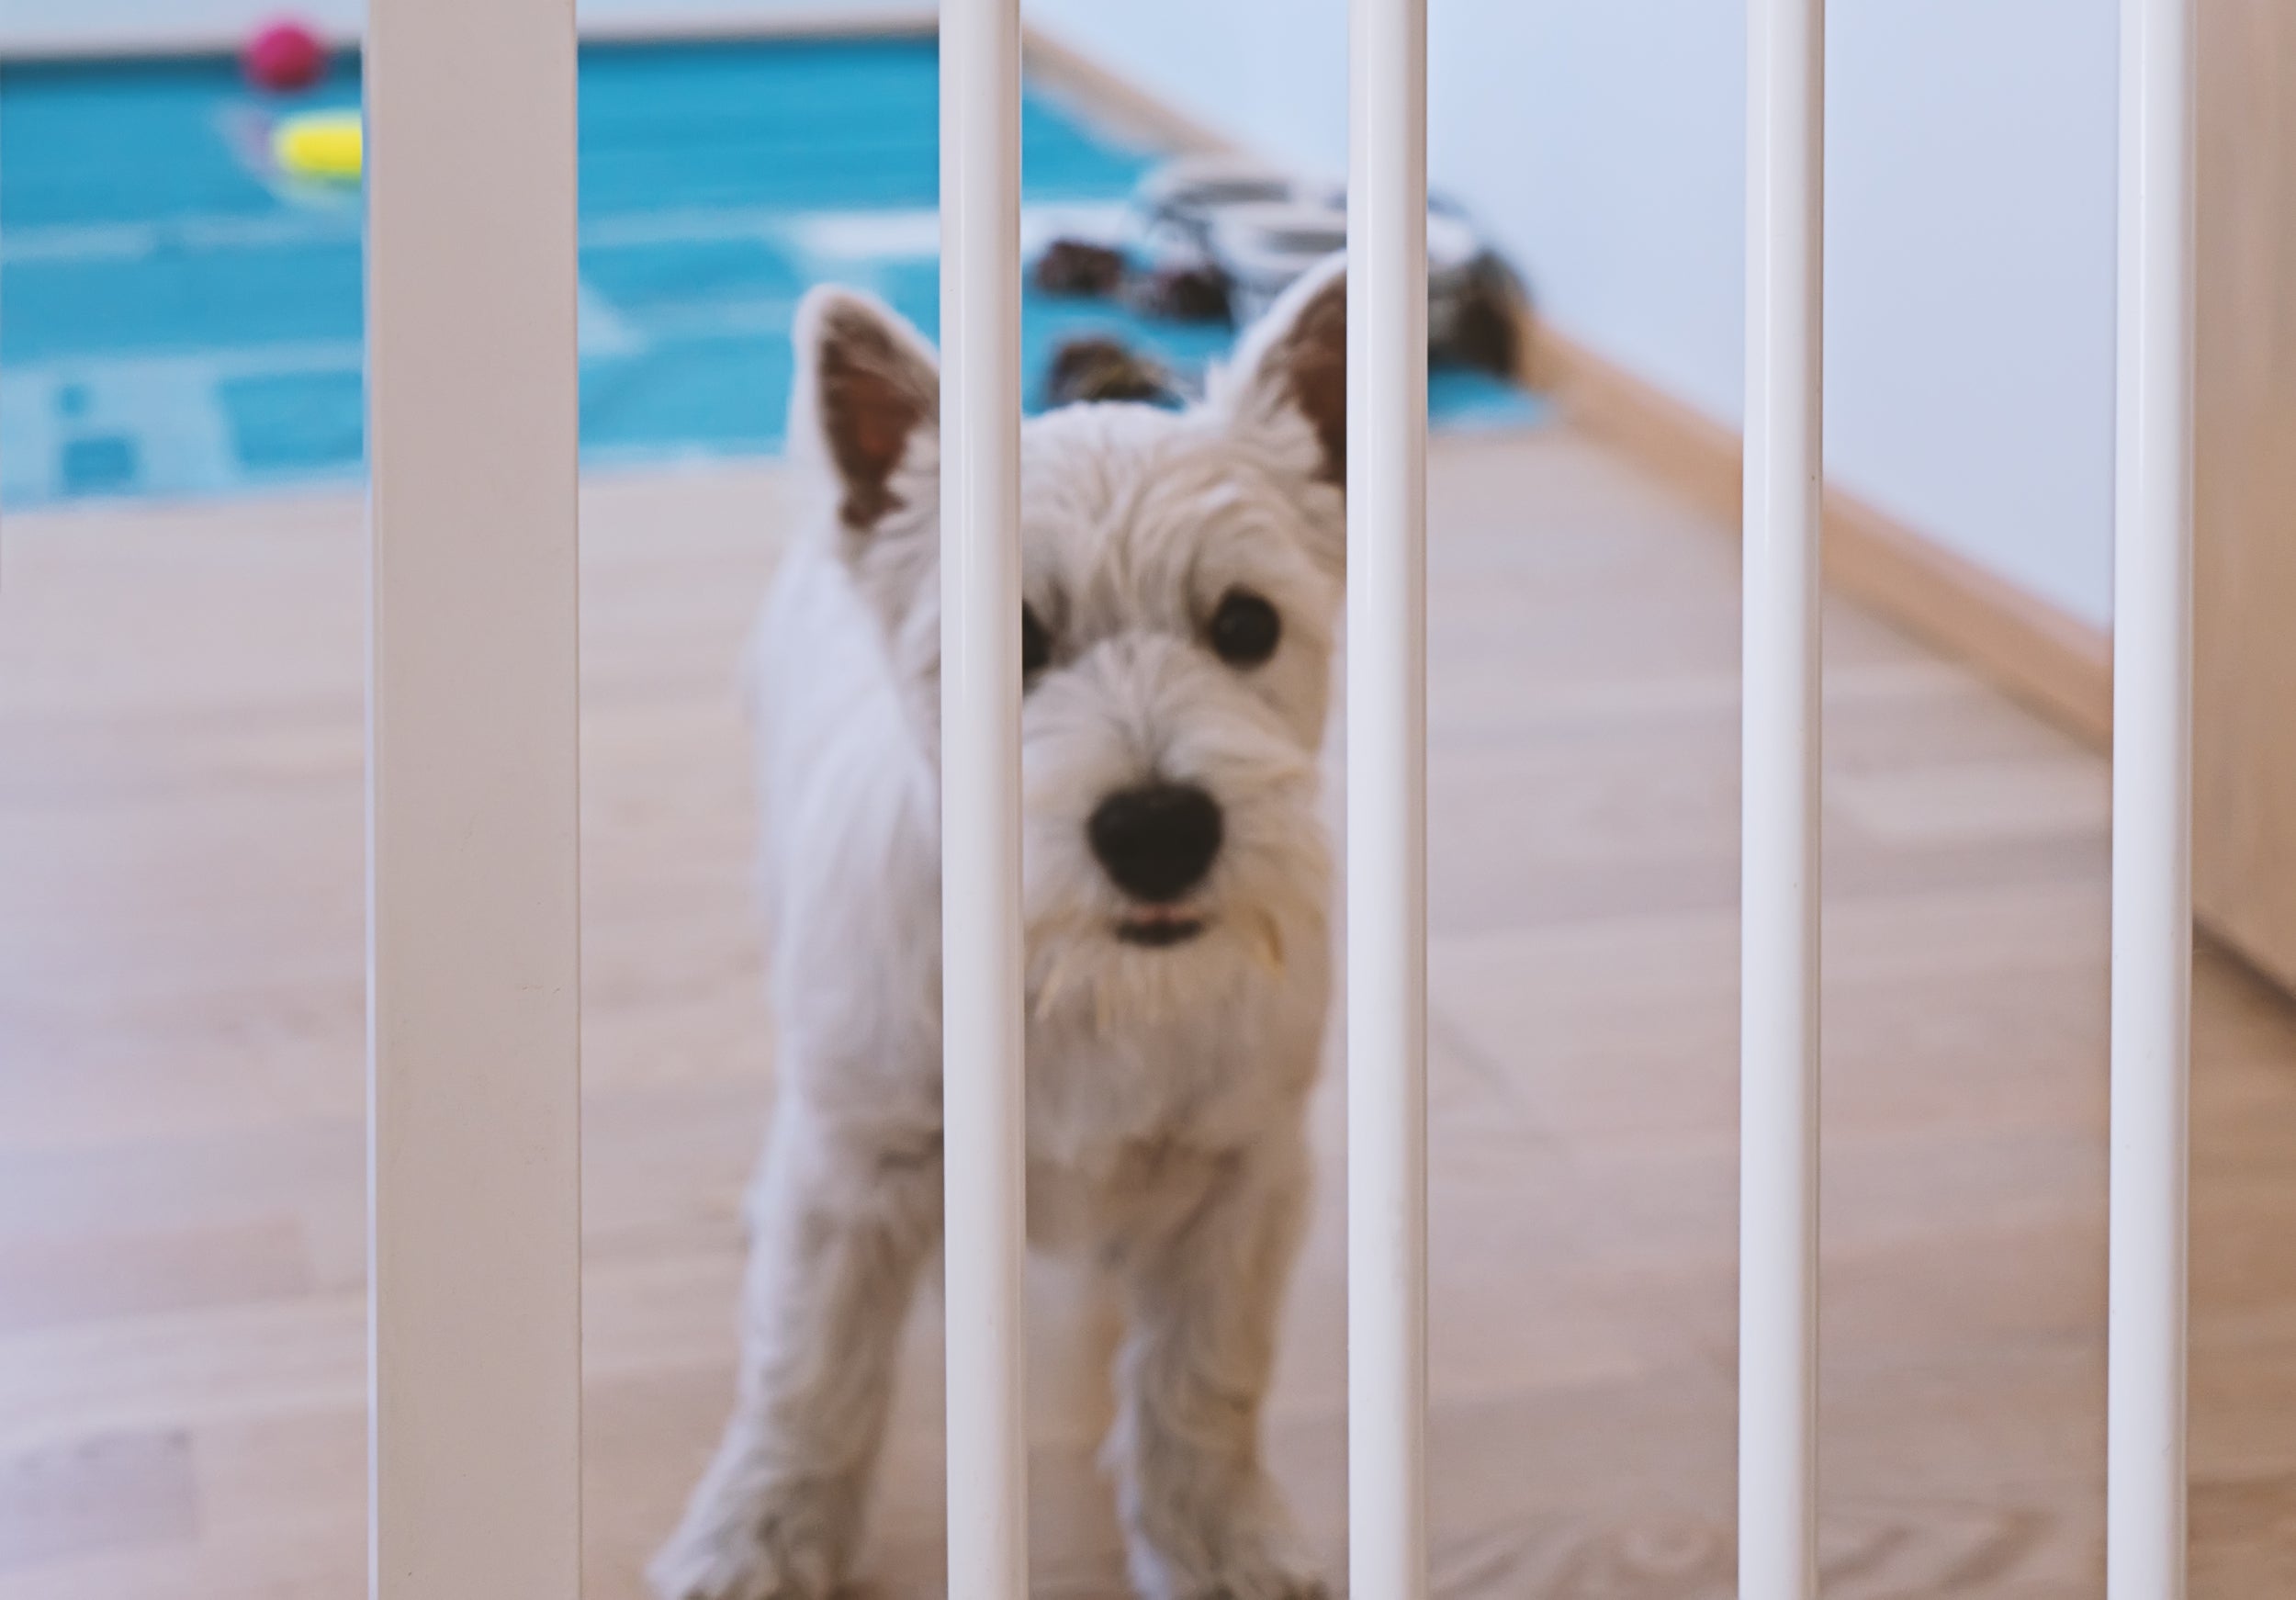 Baby gates can help while you house-train your new puppy